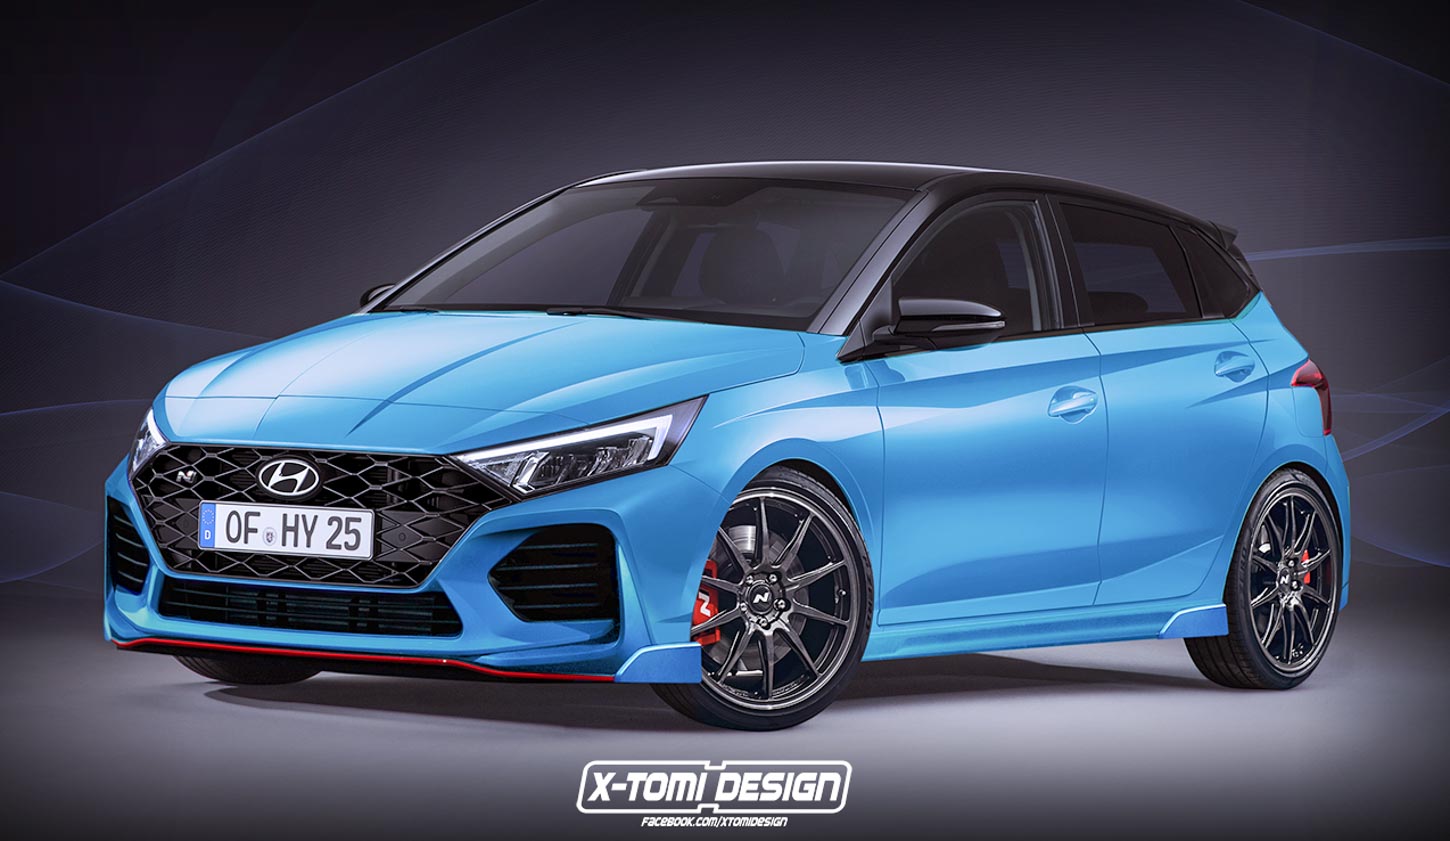 Performance-Based 2020 Hyundai i20 N Rendered; Launch In The Coming Months